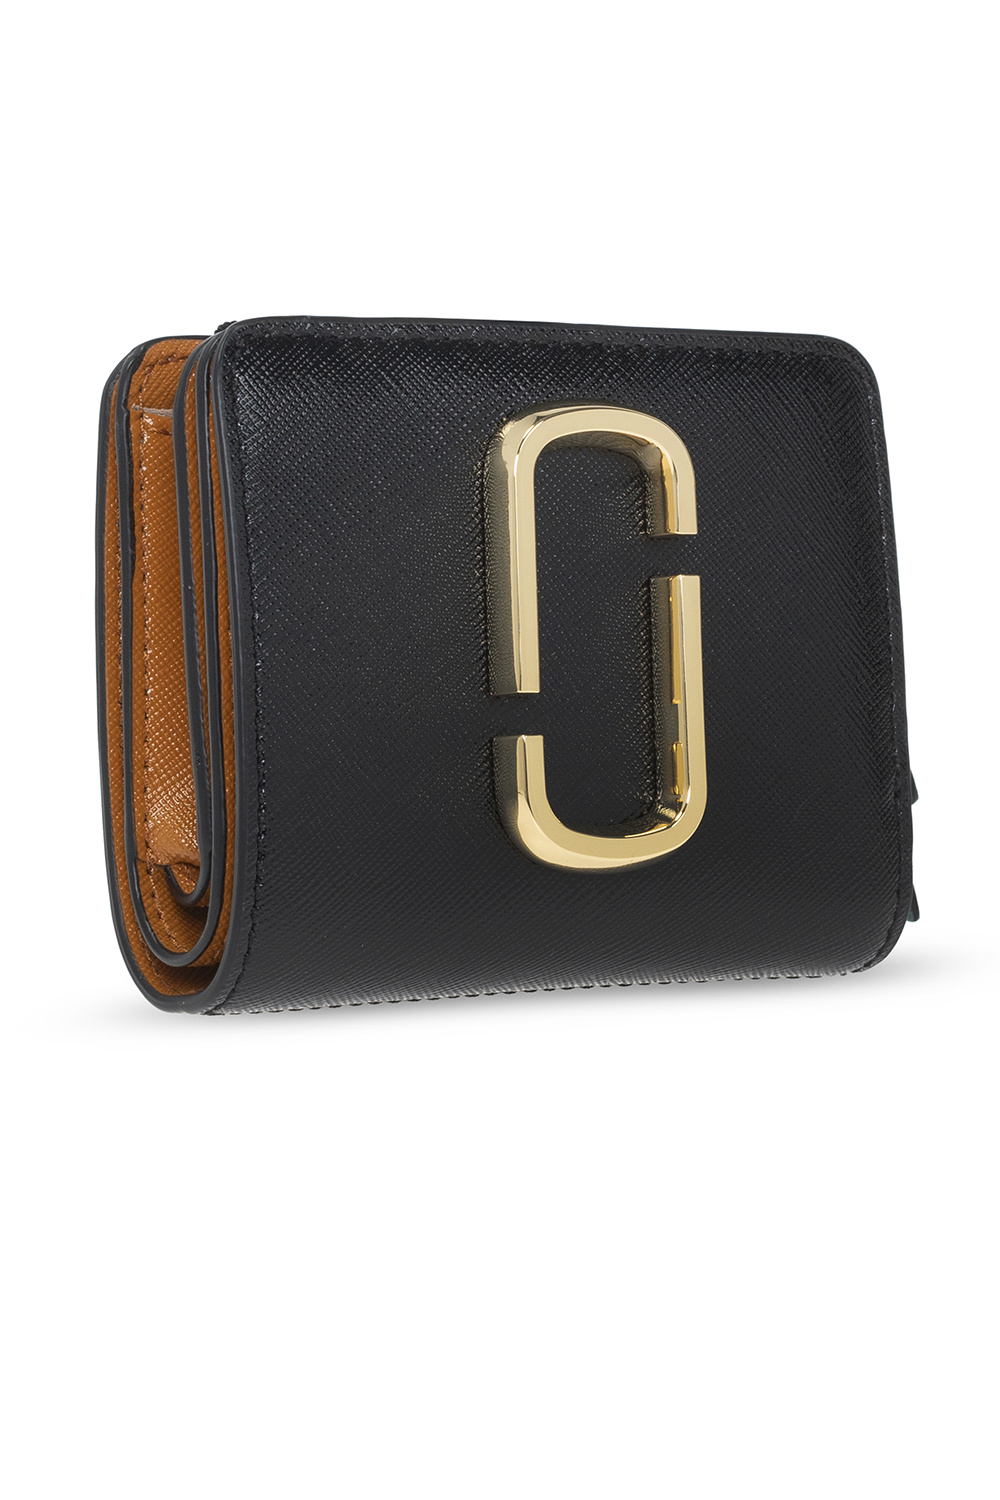 Marc Jacobs Recruit Nomad | Marc Jacobs Wallet with | IetpShops | Women's Accessories